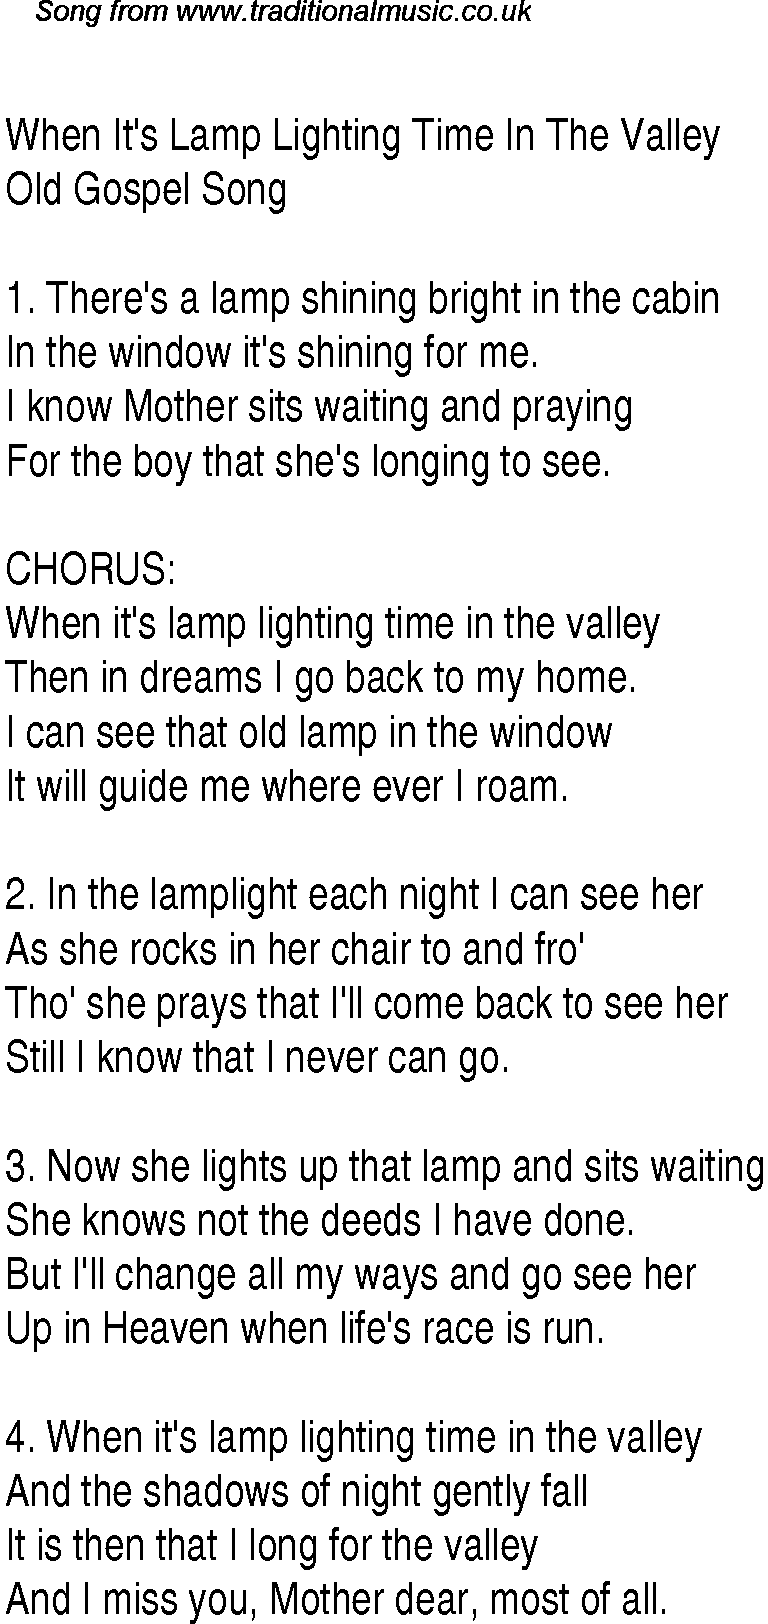 Gospel Song: when-it's-lamp-lighting-time-in-the-valley, lyrics and chords.